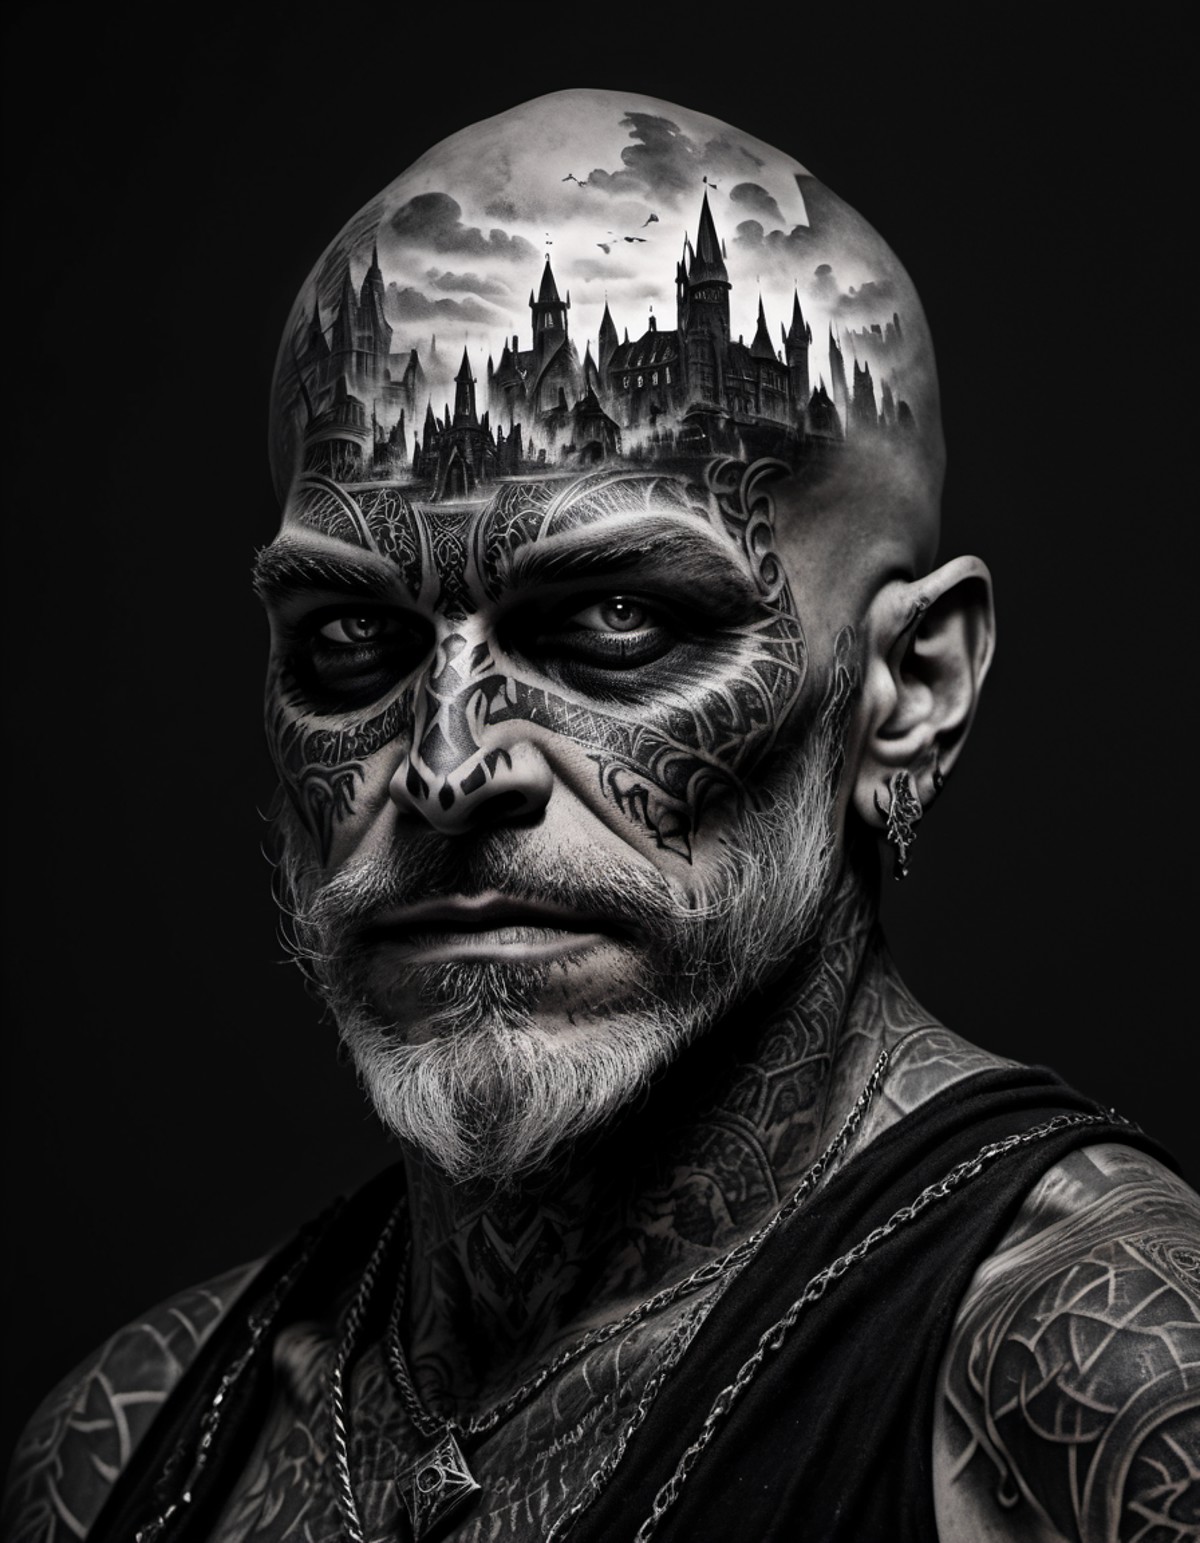 double exposure, black and white pencil sketch extreme side closeup of a wizards face with black tattoos, mountains,  blac...